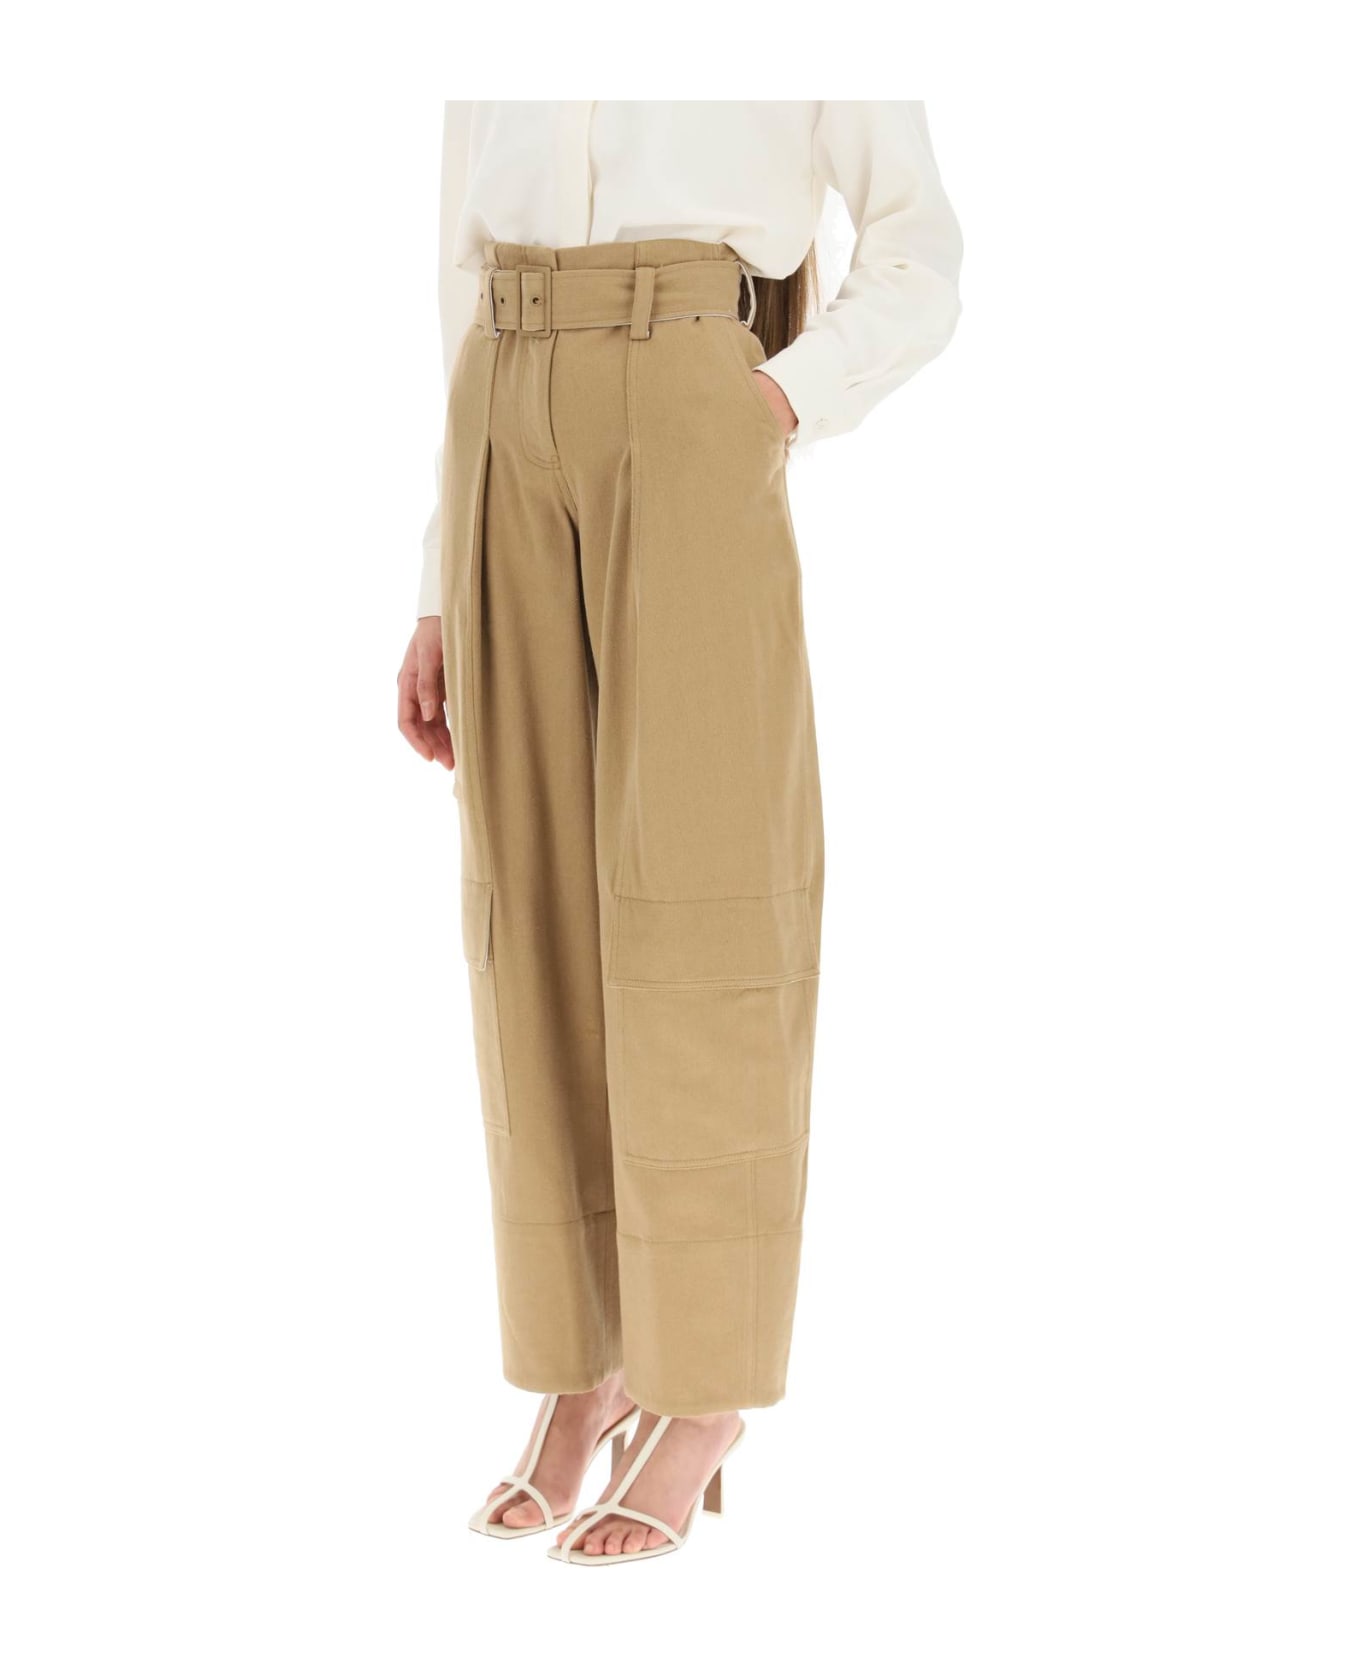 Low Classic Cargo Pants With Matching Belt - BEIGE (Beige)